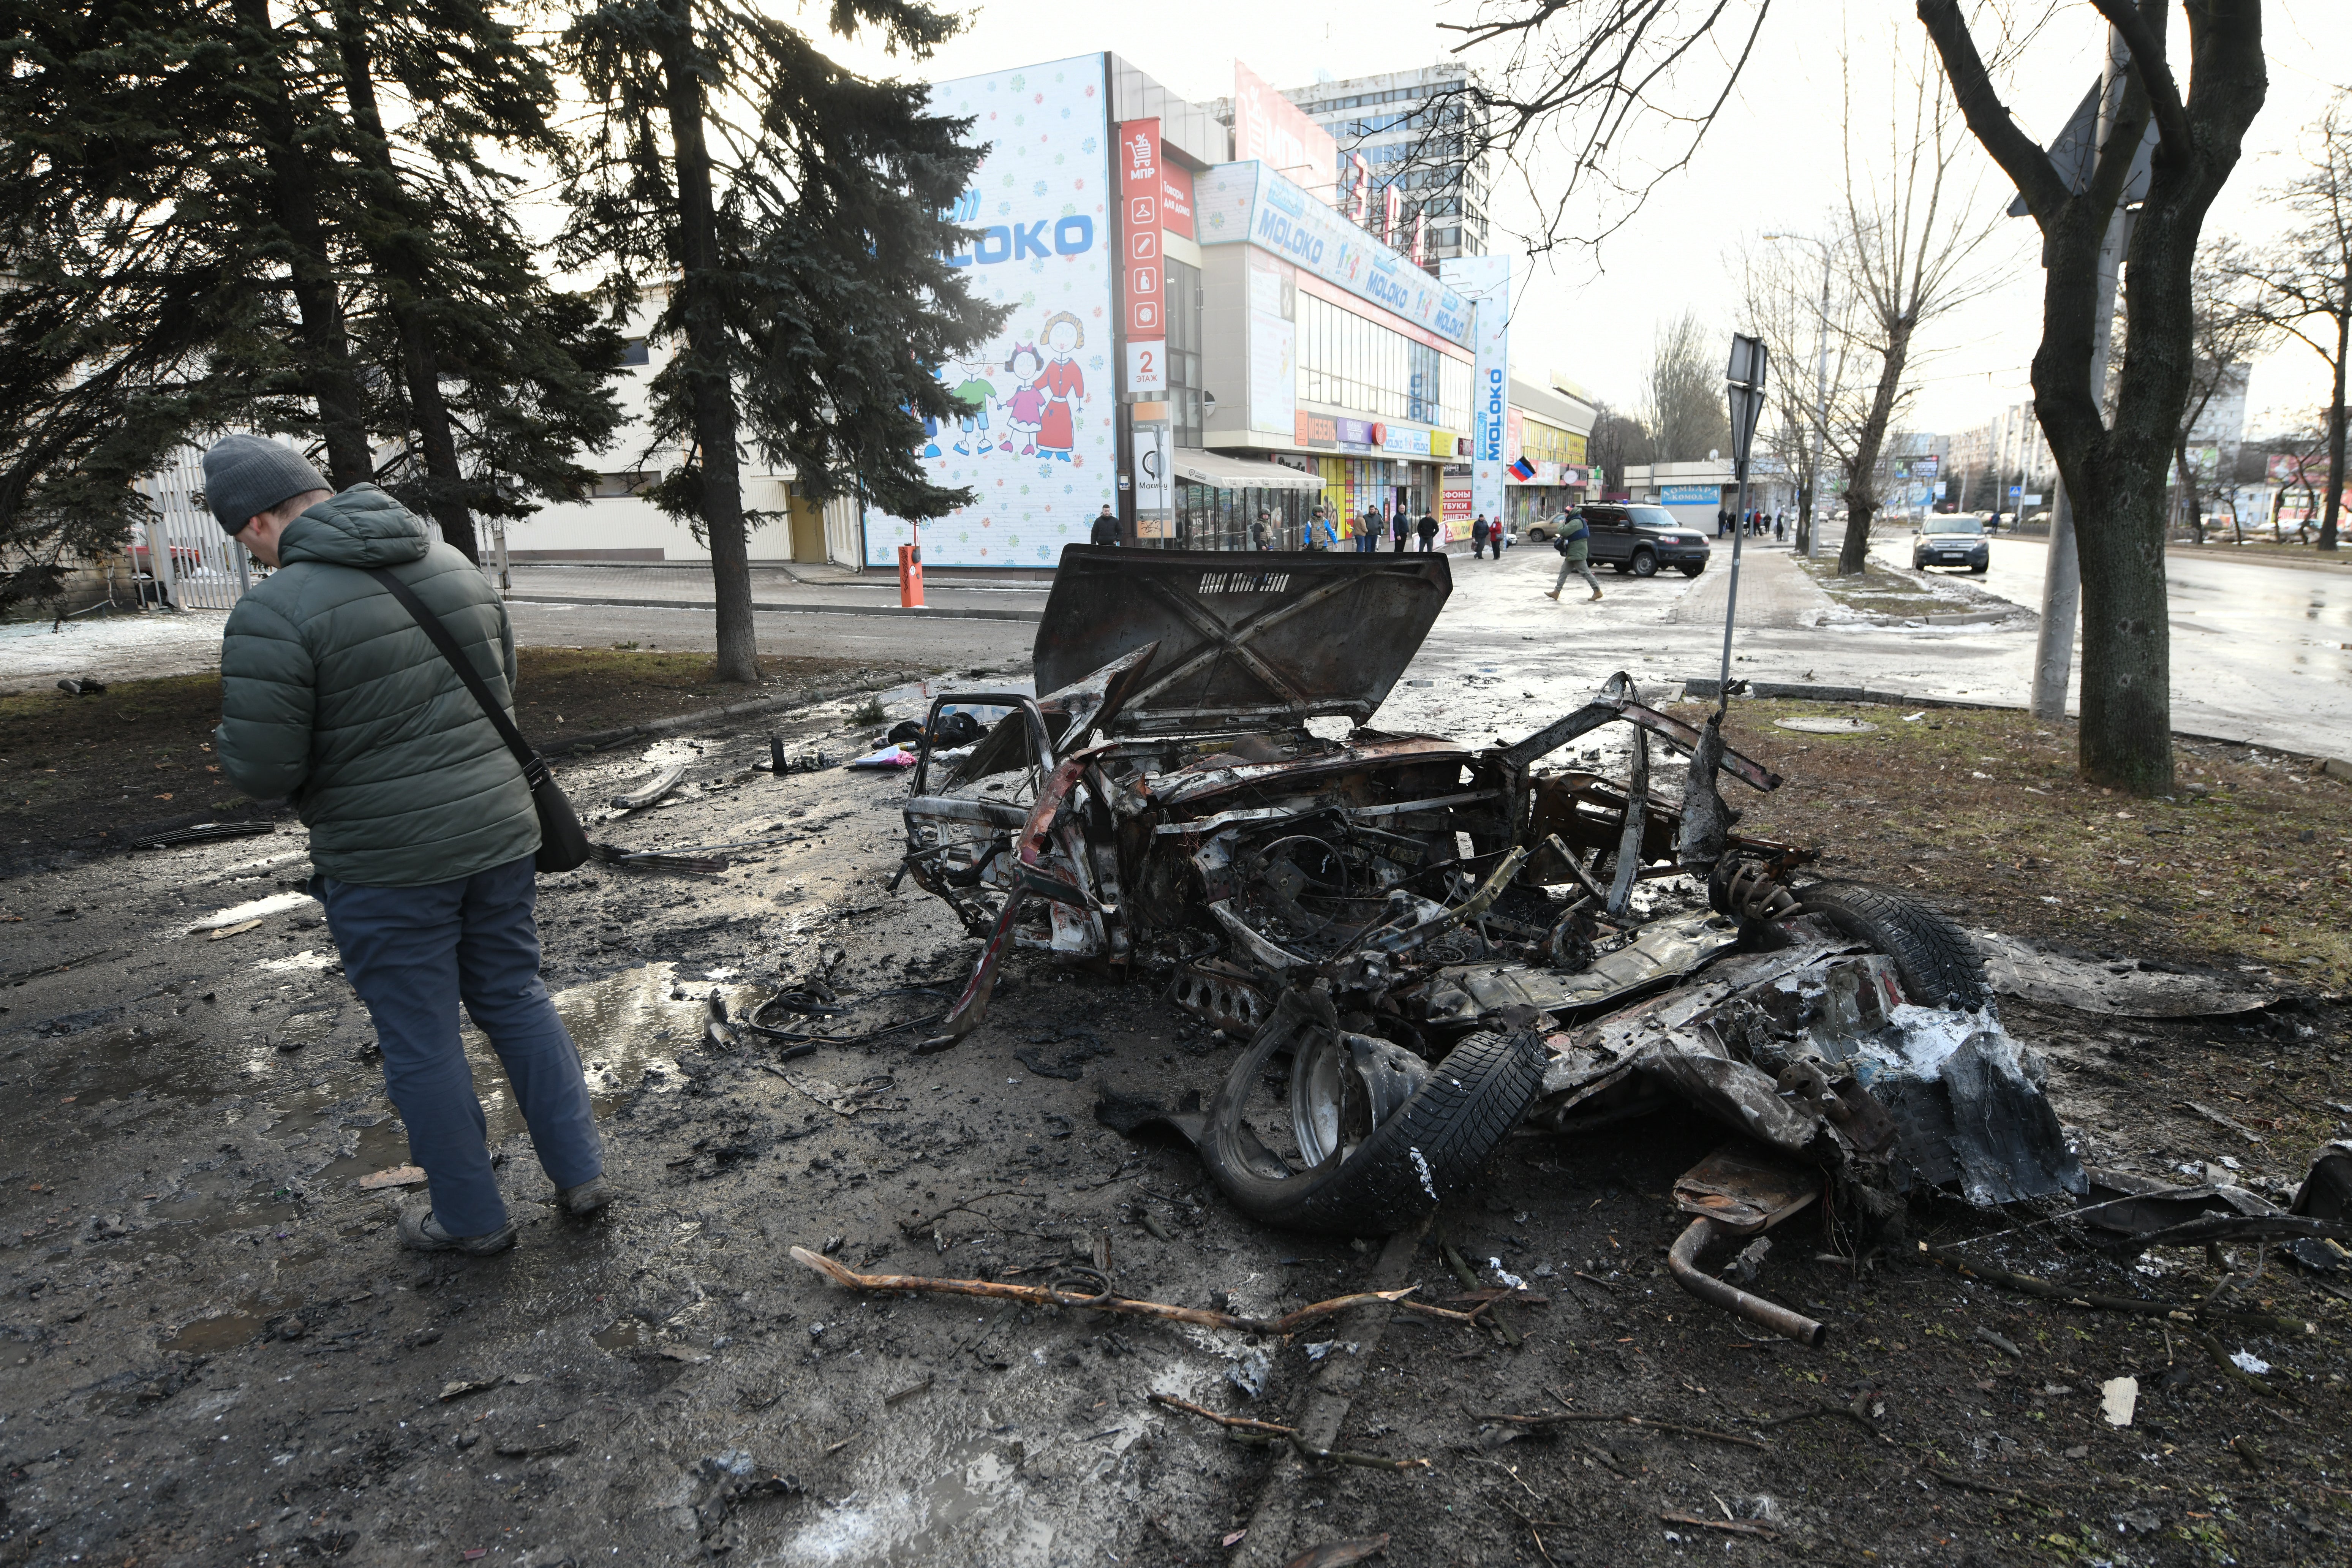 Recent shelling in Donetsk has caused devastation to civilian infrastructure